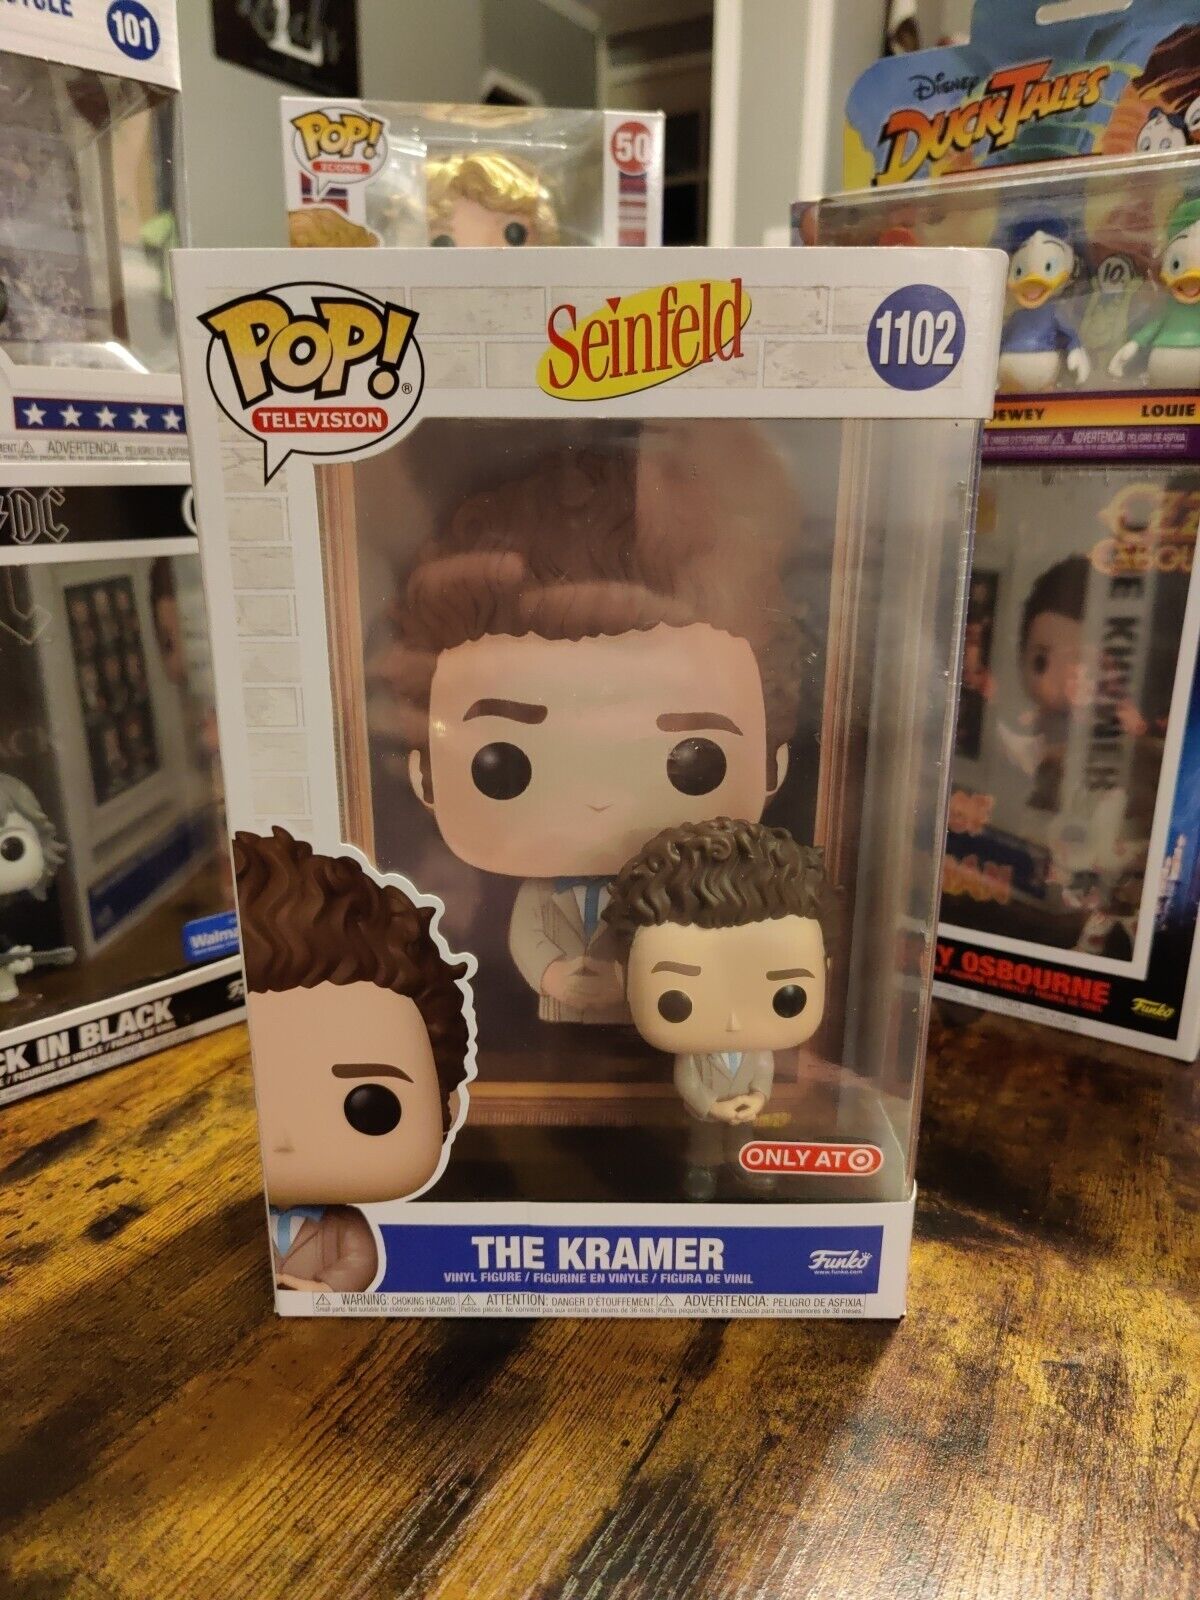 Brand New Funko Pop Television The Kramer Seinfeld Target Exclusive #1102